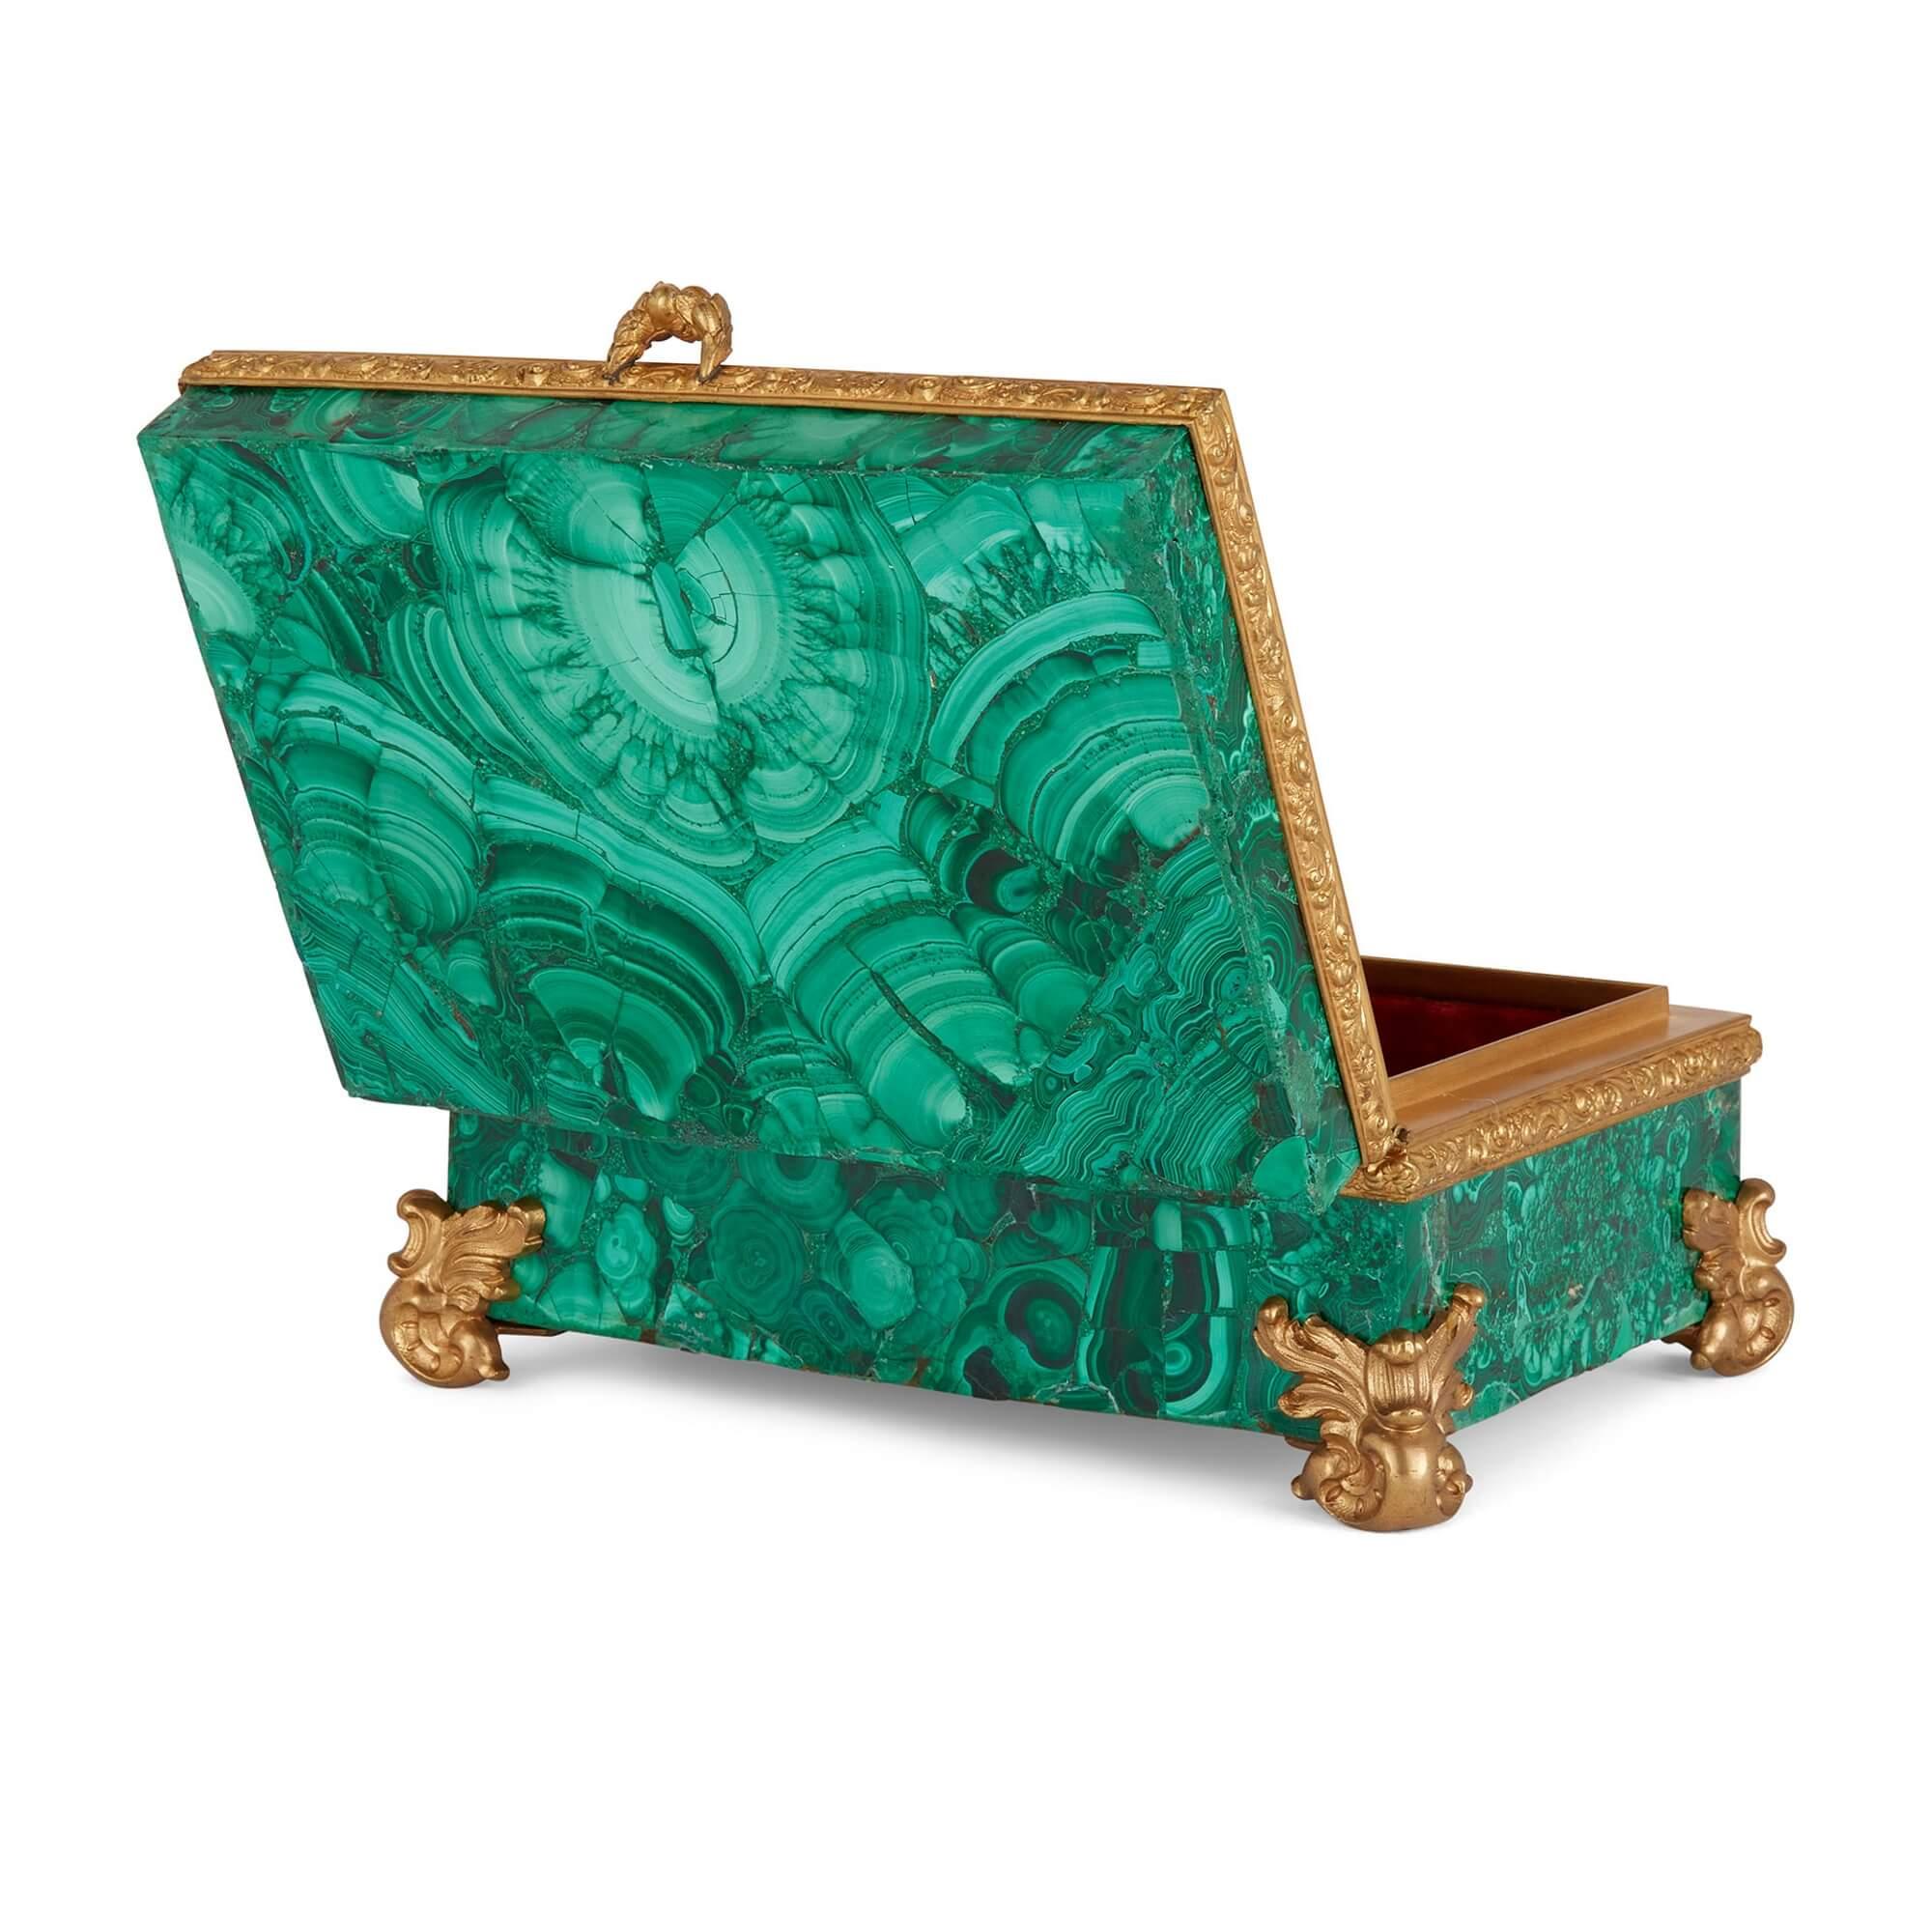 Antique 19th Century Malachite and Ormolu Casket  In Good Condition For Sale In London, GB